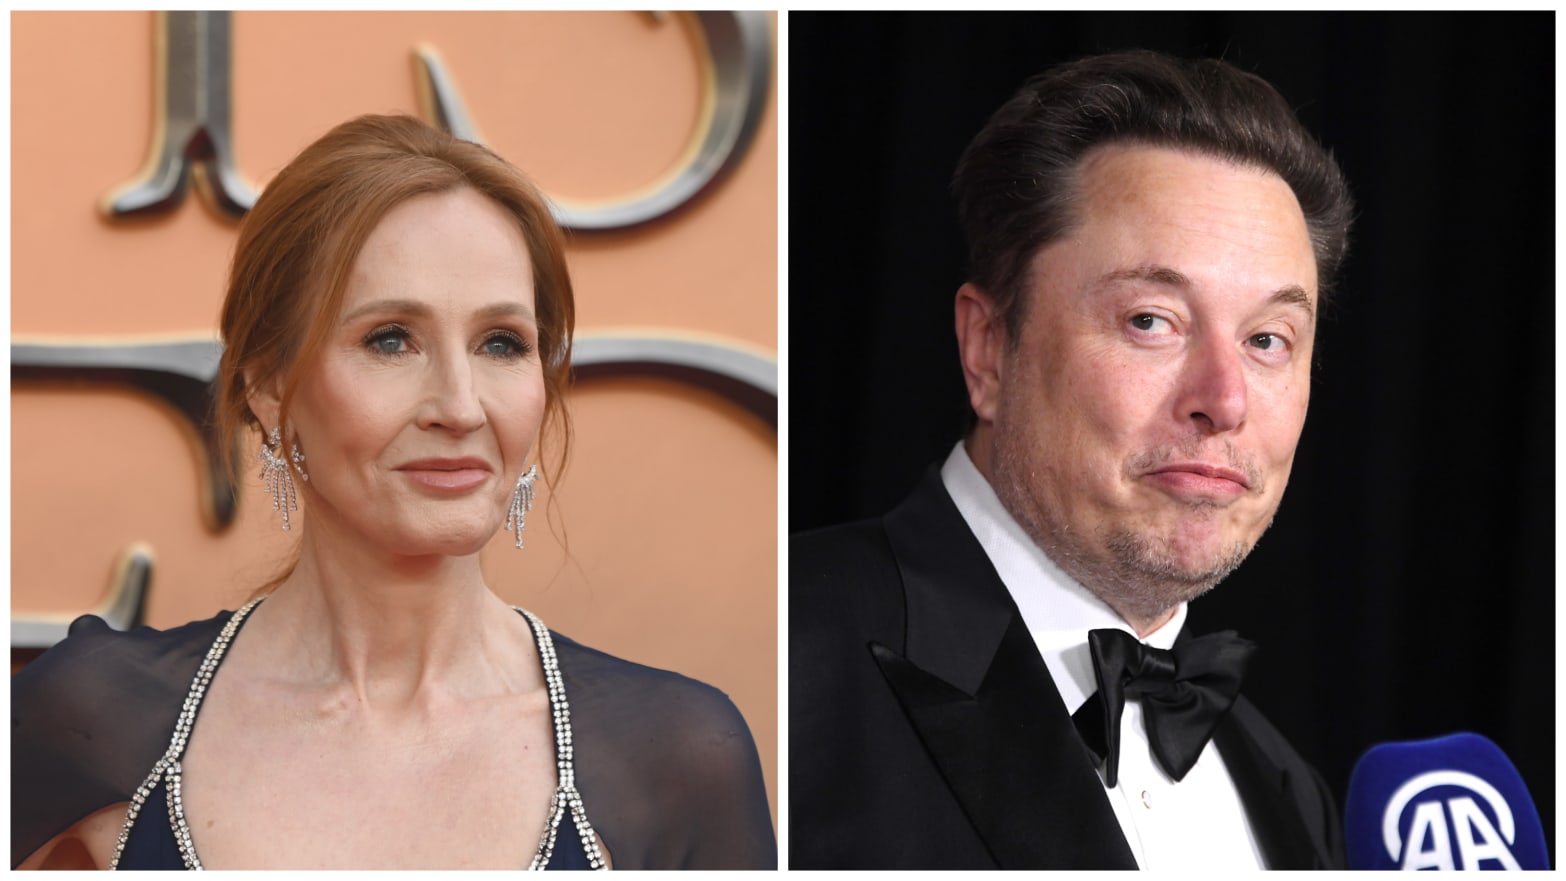 Say What Now? Elon Musk Says He Agrees With J.K. Rowling’s Anti-Trans Rant But Suggests ‘Also Posting Interesting and Positive Content on Other Matters’